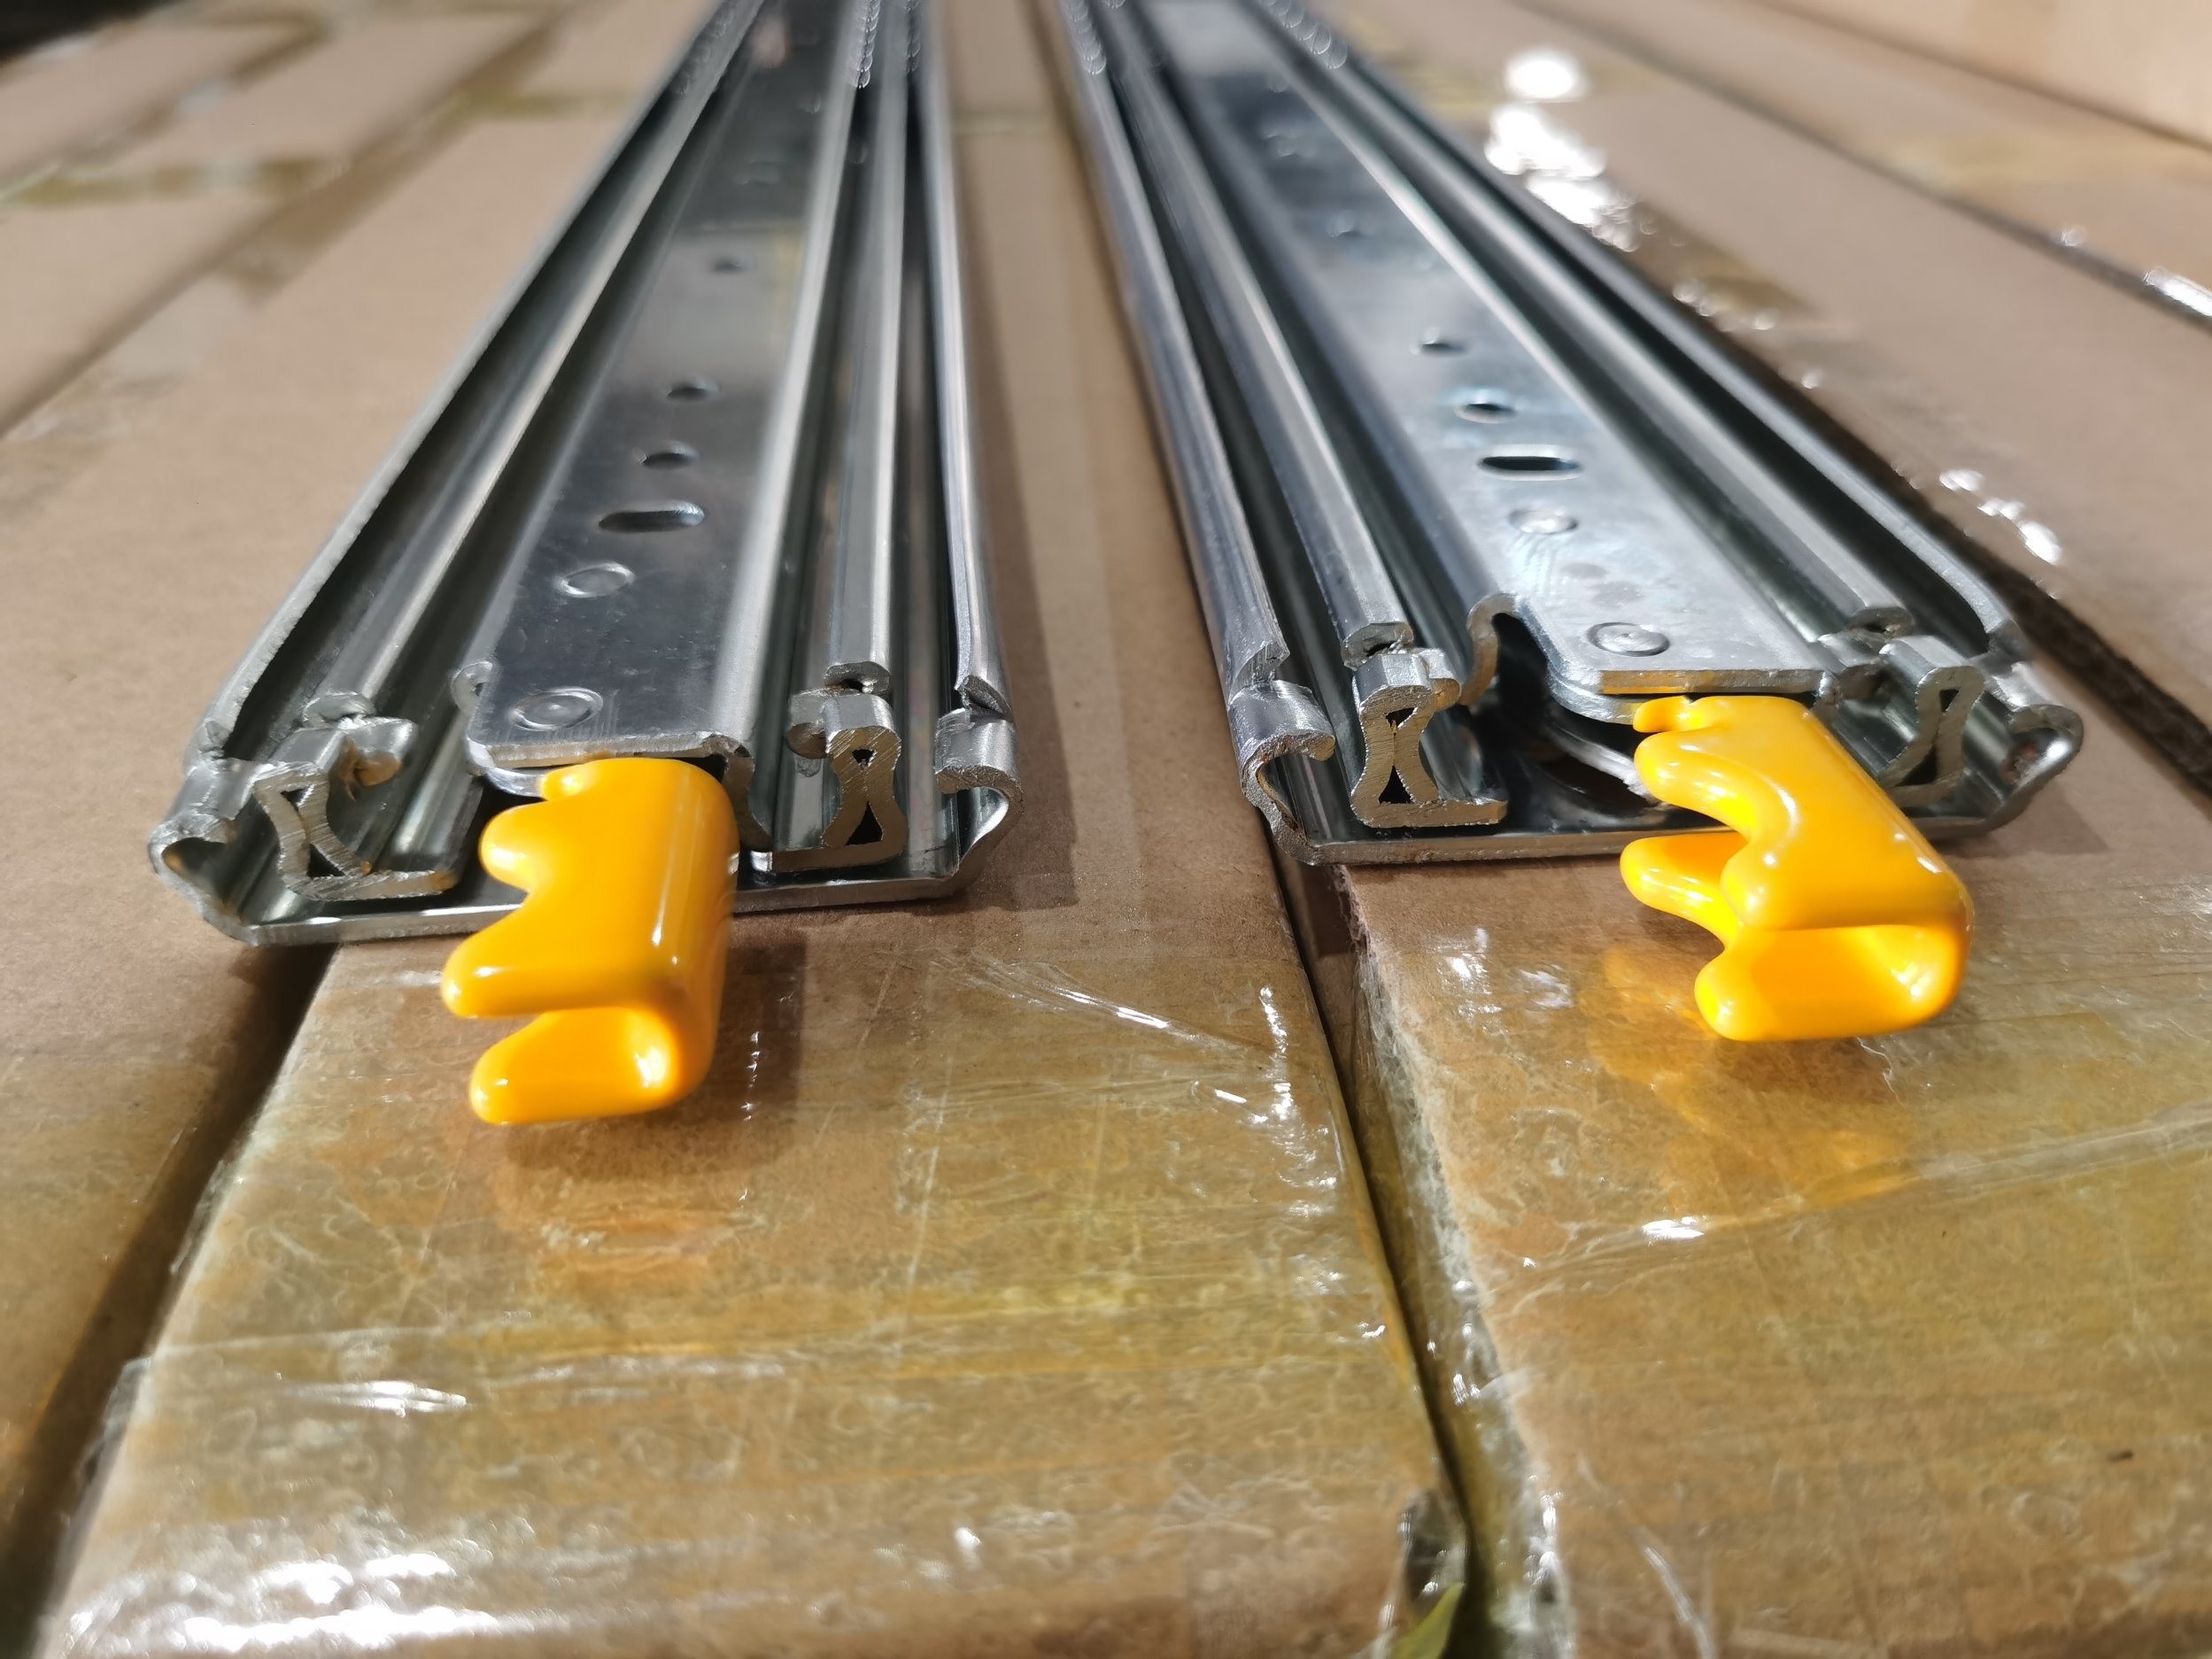 Gefieca 1200mm Length 76mm Width Heavy Duty Ball Bearing Drawer Slide with Lock System for Tooling Box /RV Car Cabinet